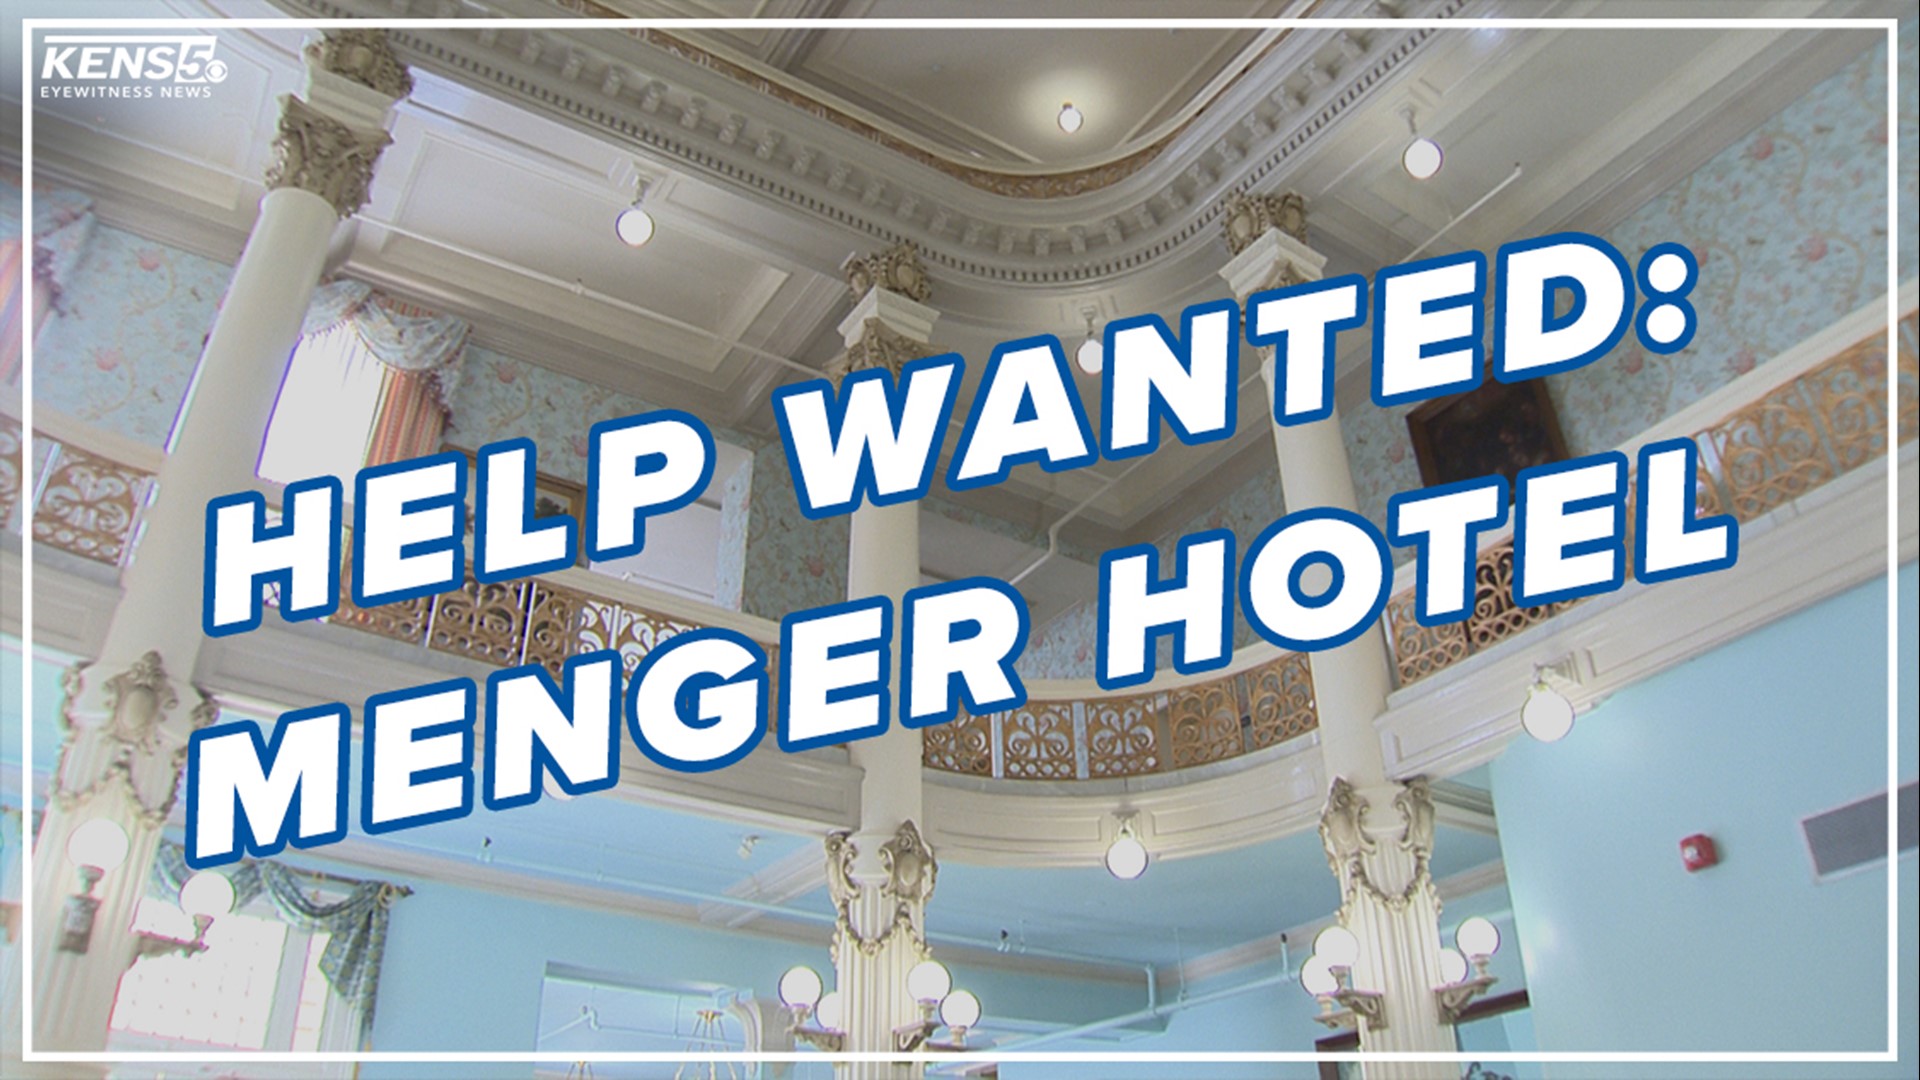 The historic Menger Hotel is seeing major business again as more people are traveling to San Antonio this summer. They are hiring staff to fill the demand.